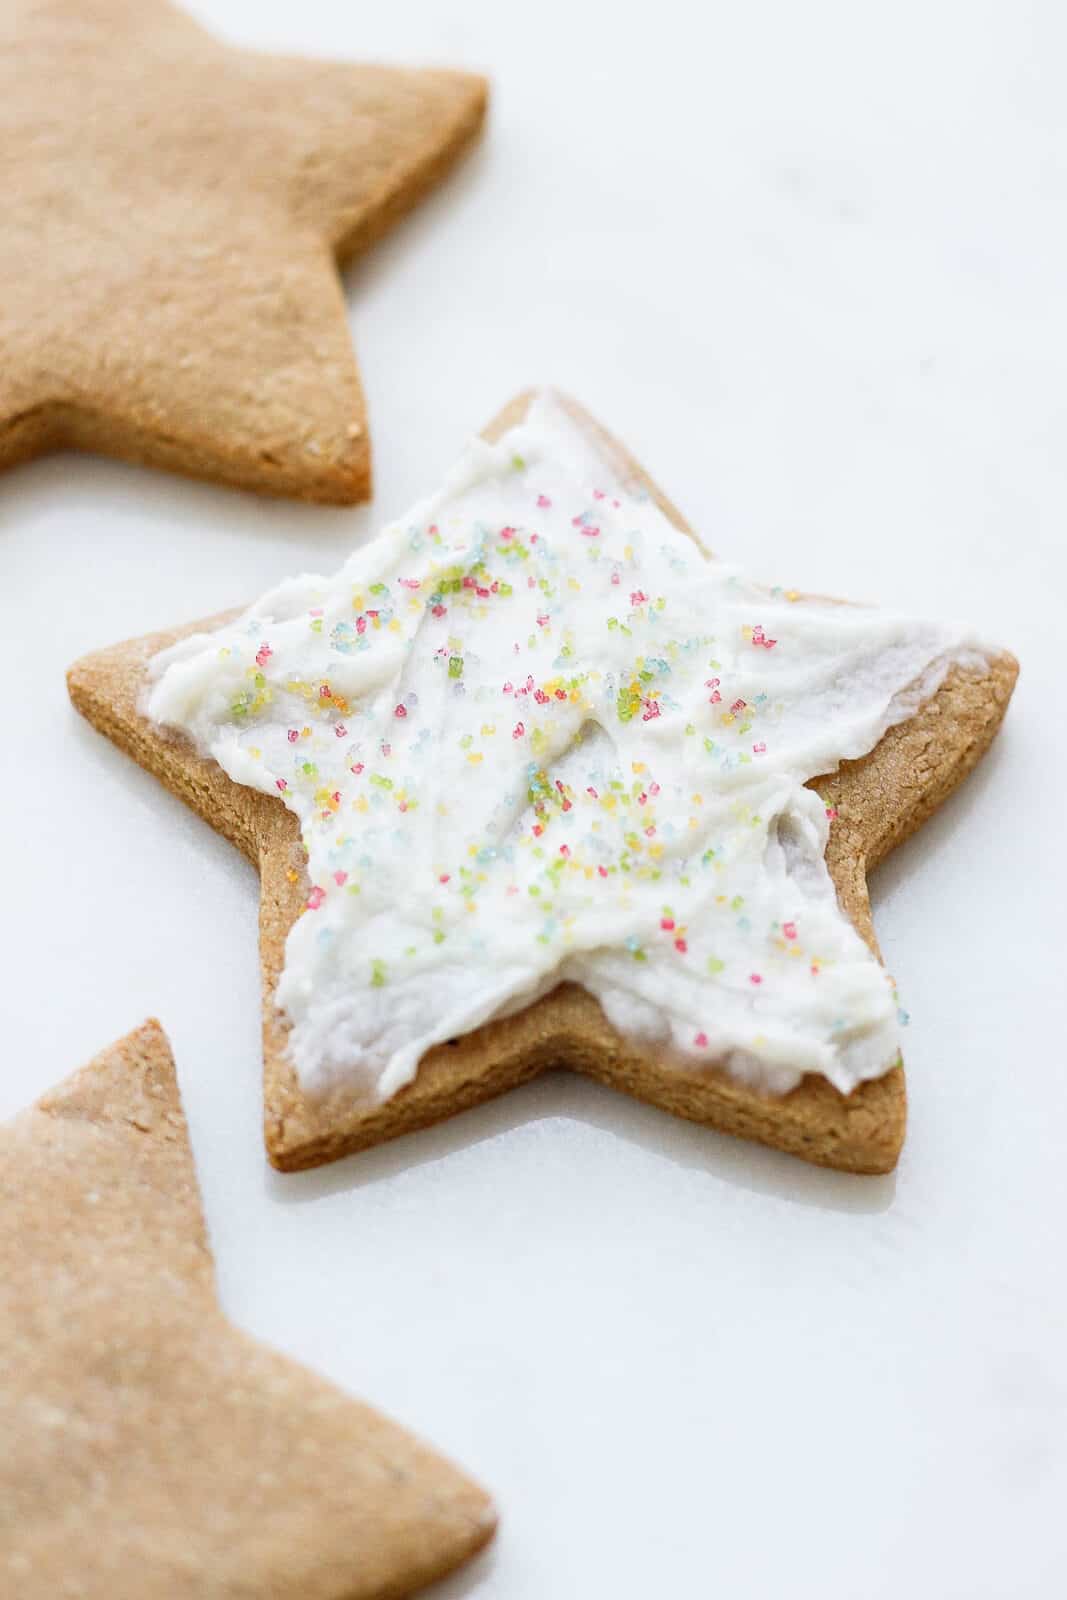 A cut-out cookie frosted with dairy free frosting and decorated with sprinkles.